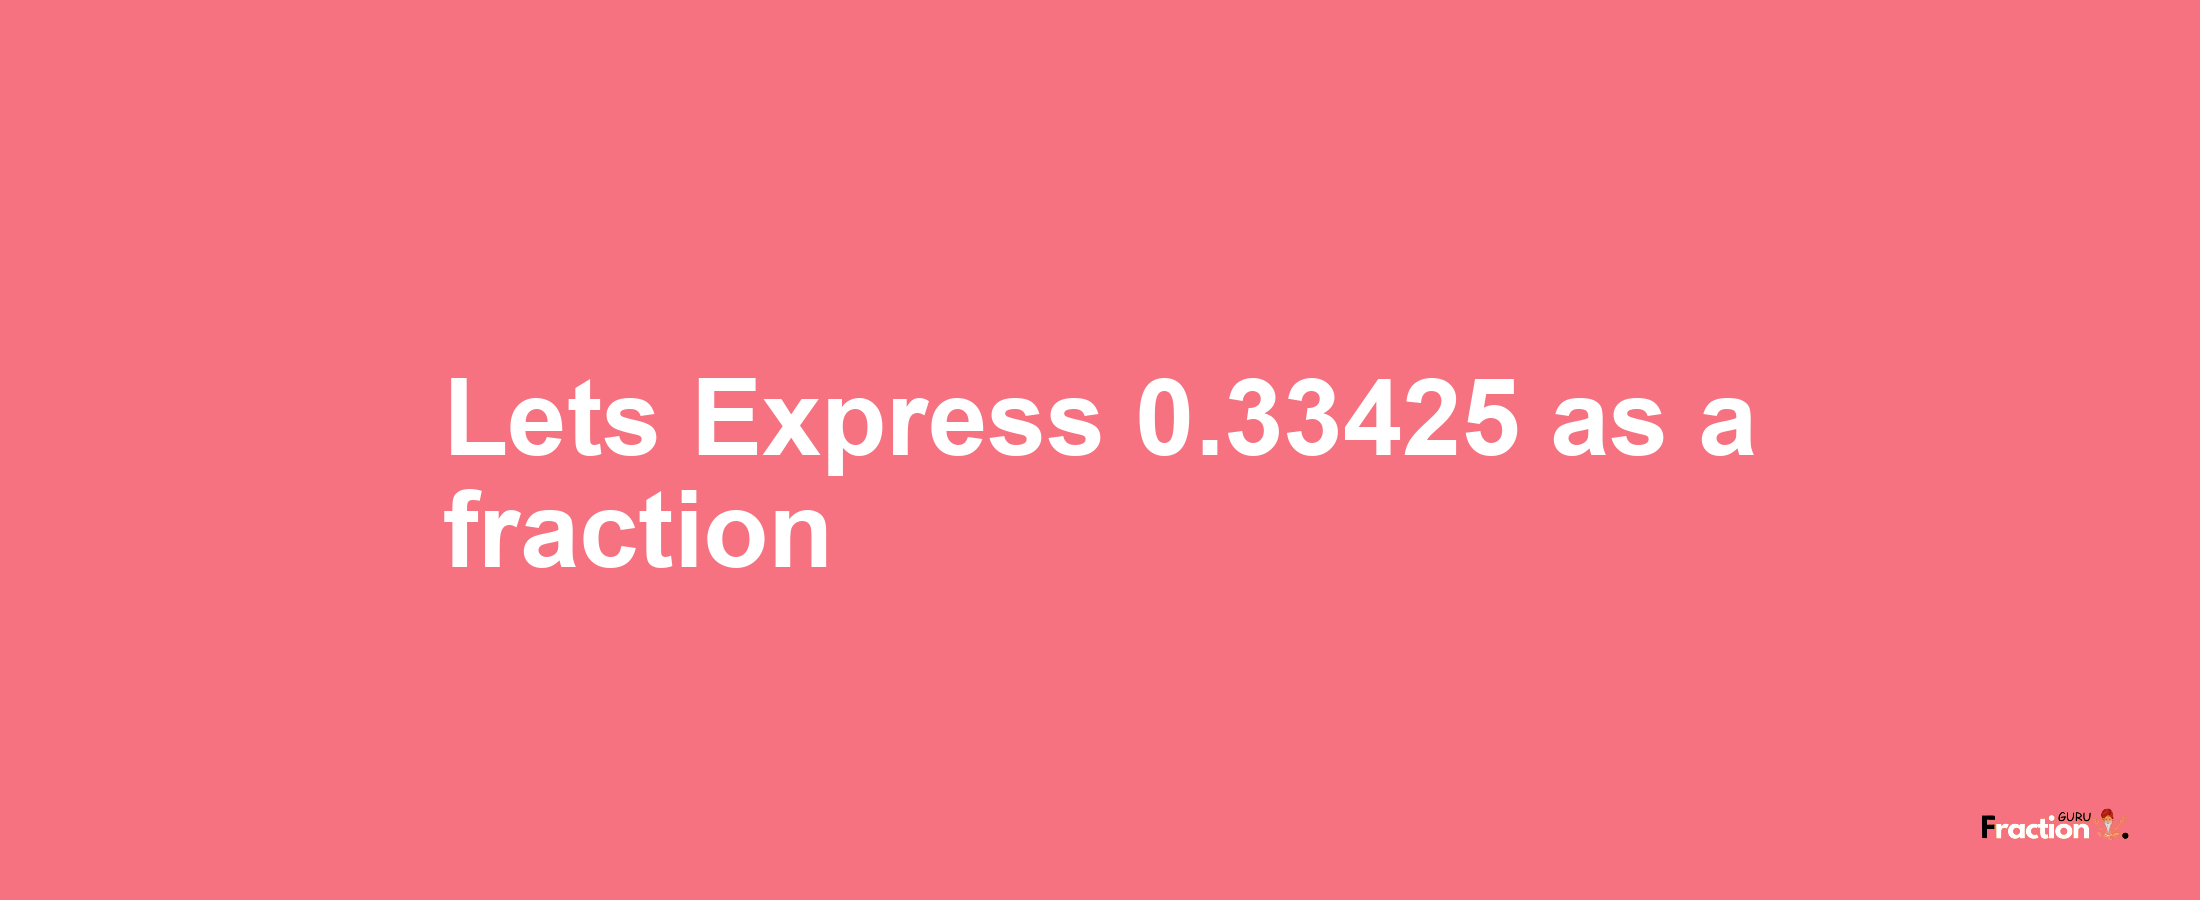 Lets Express 0.33425 as afraction